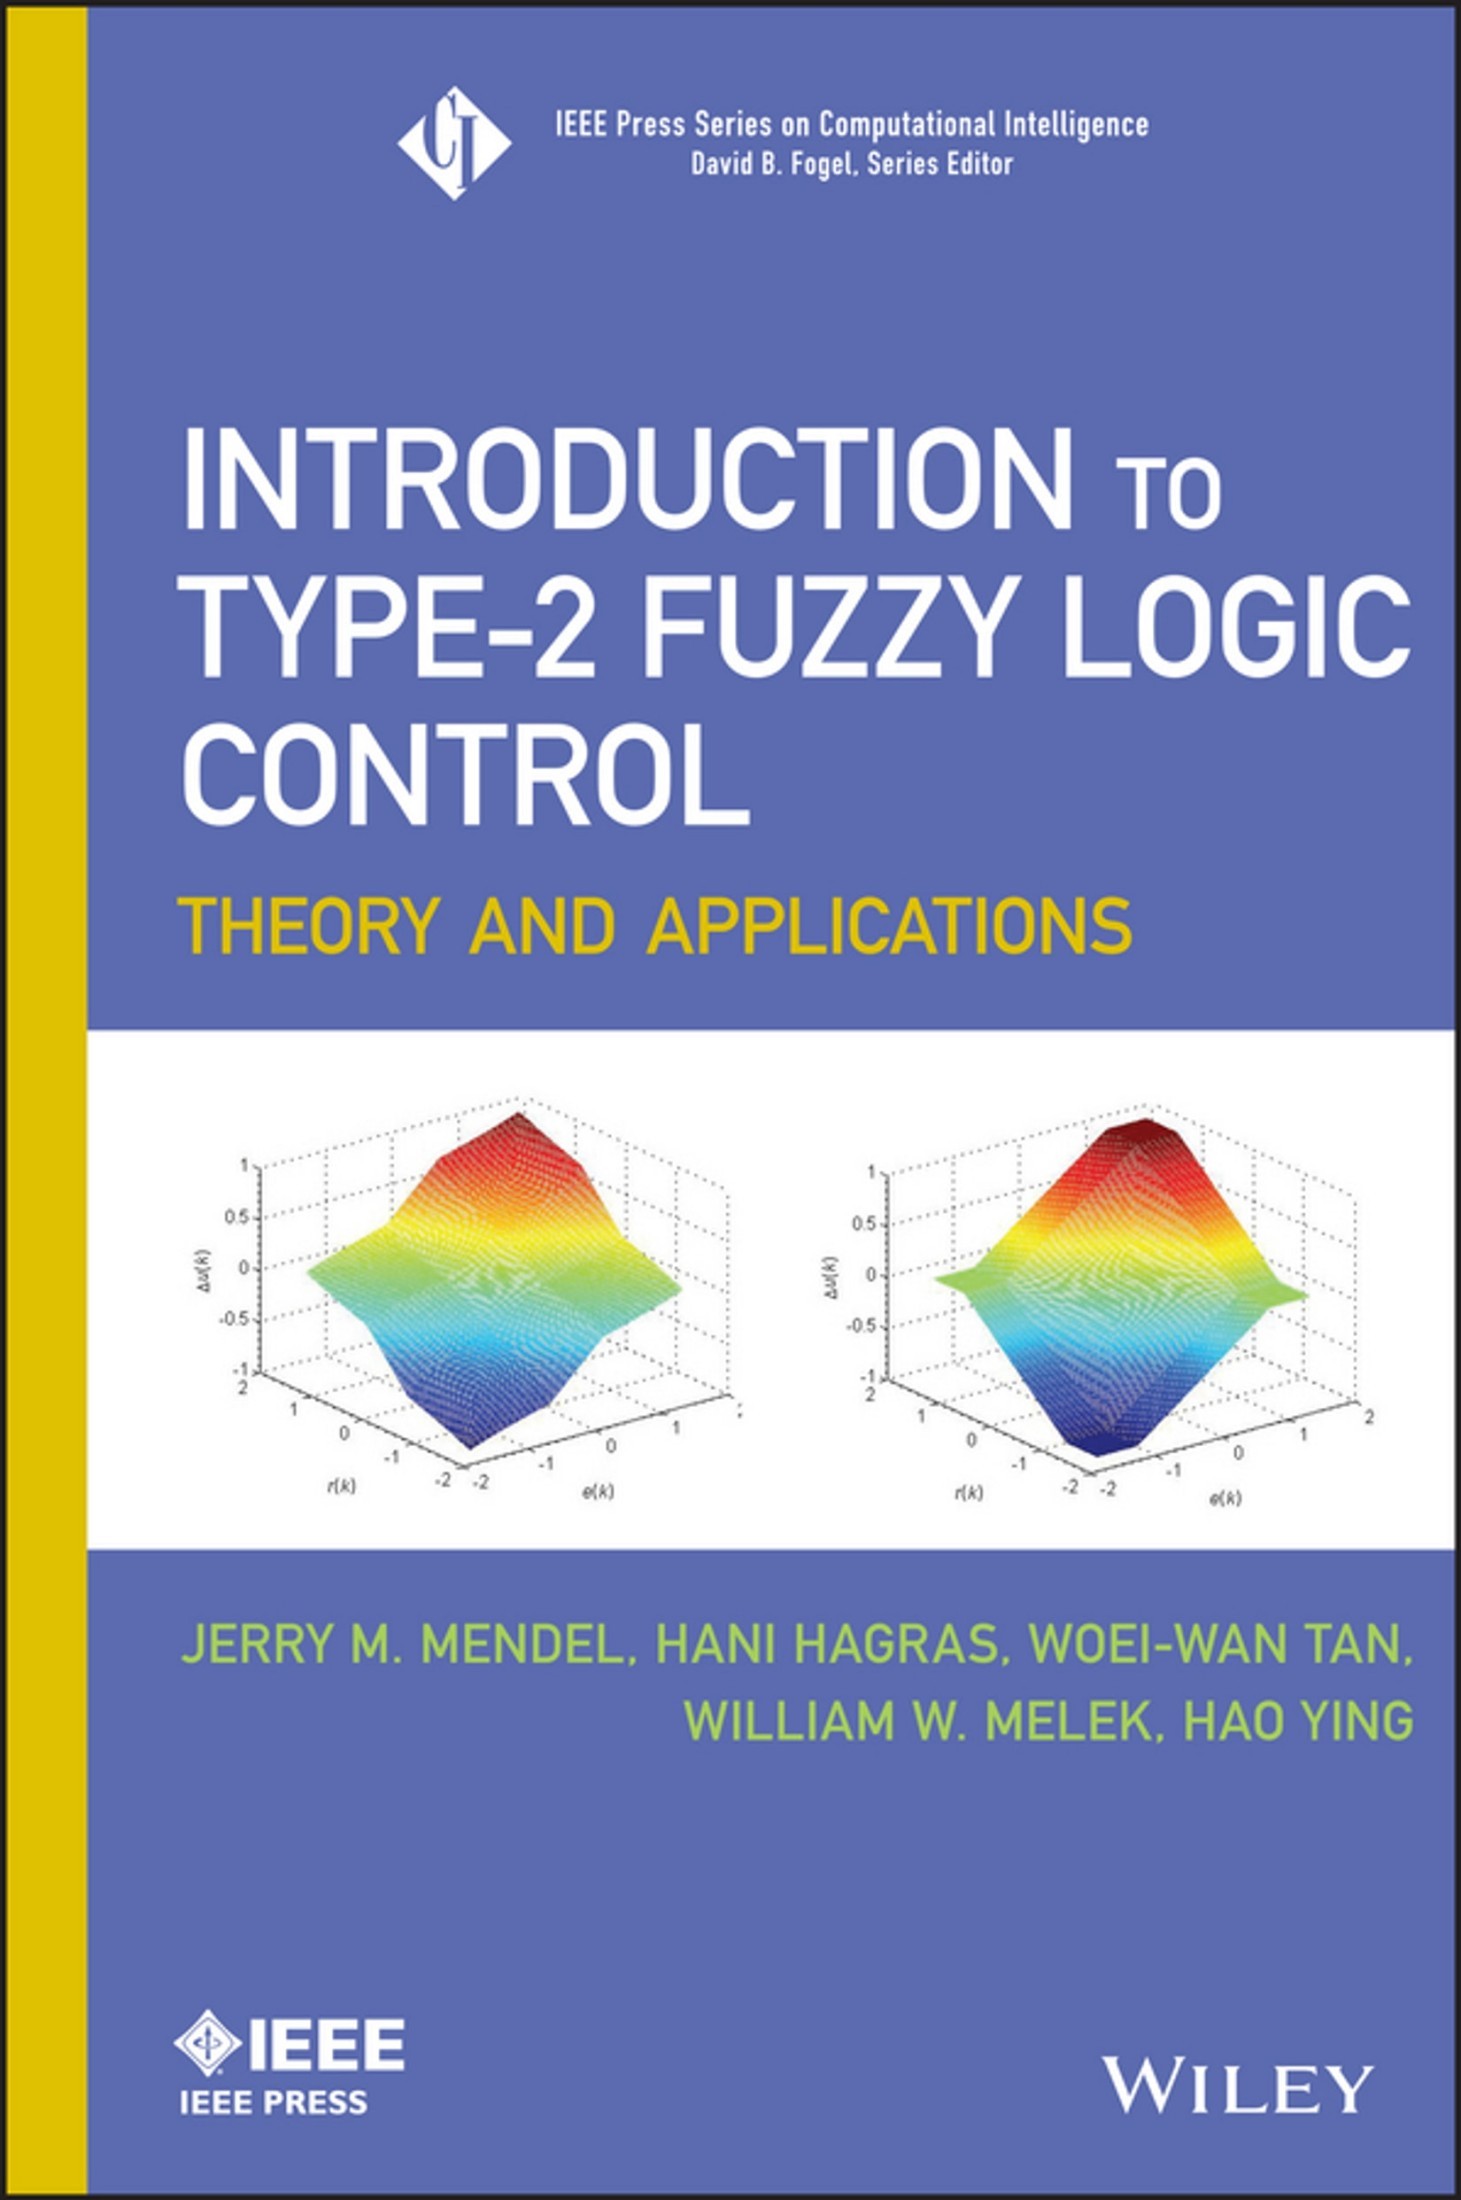 Introduction to Type-2 Fuzzy Logic Control: Theory and Applications